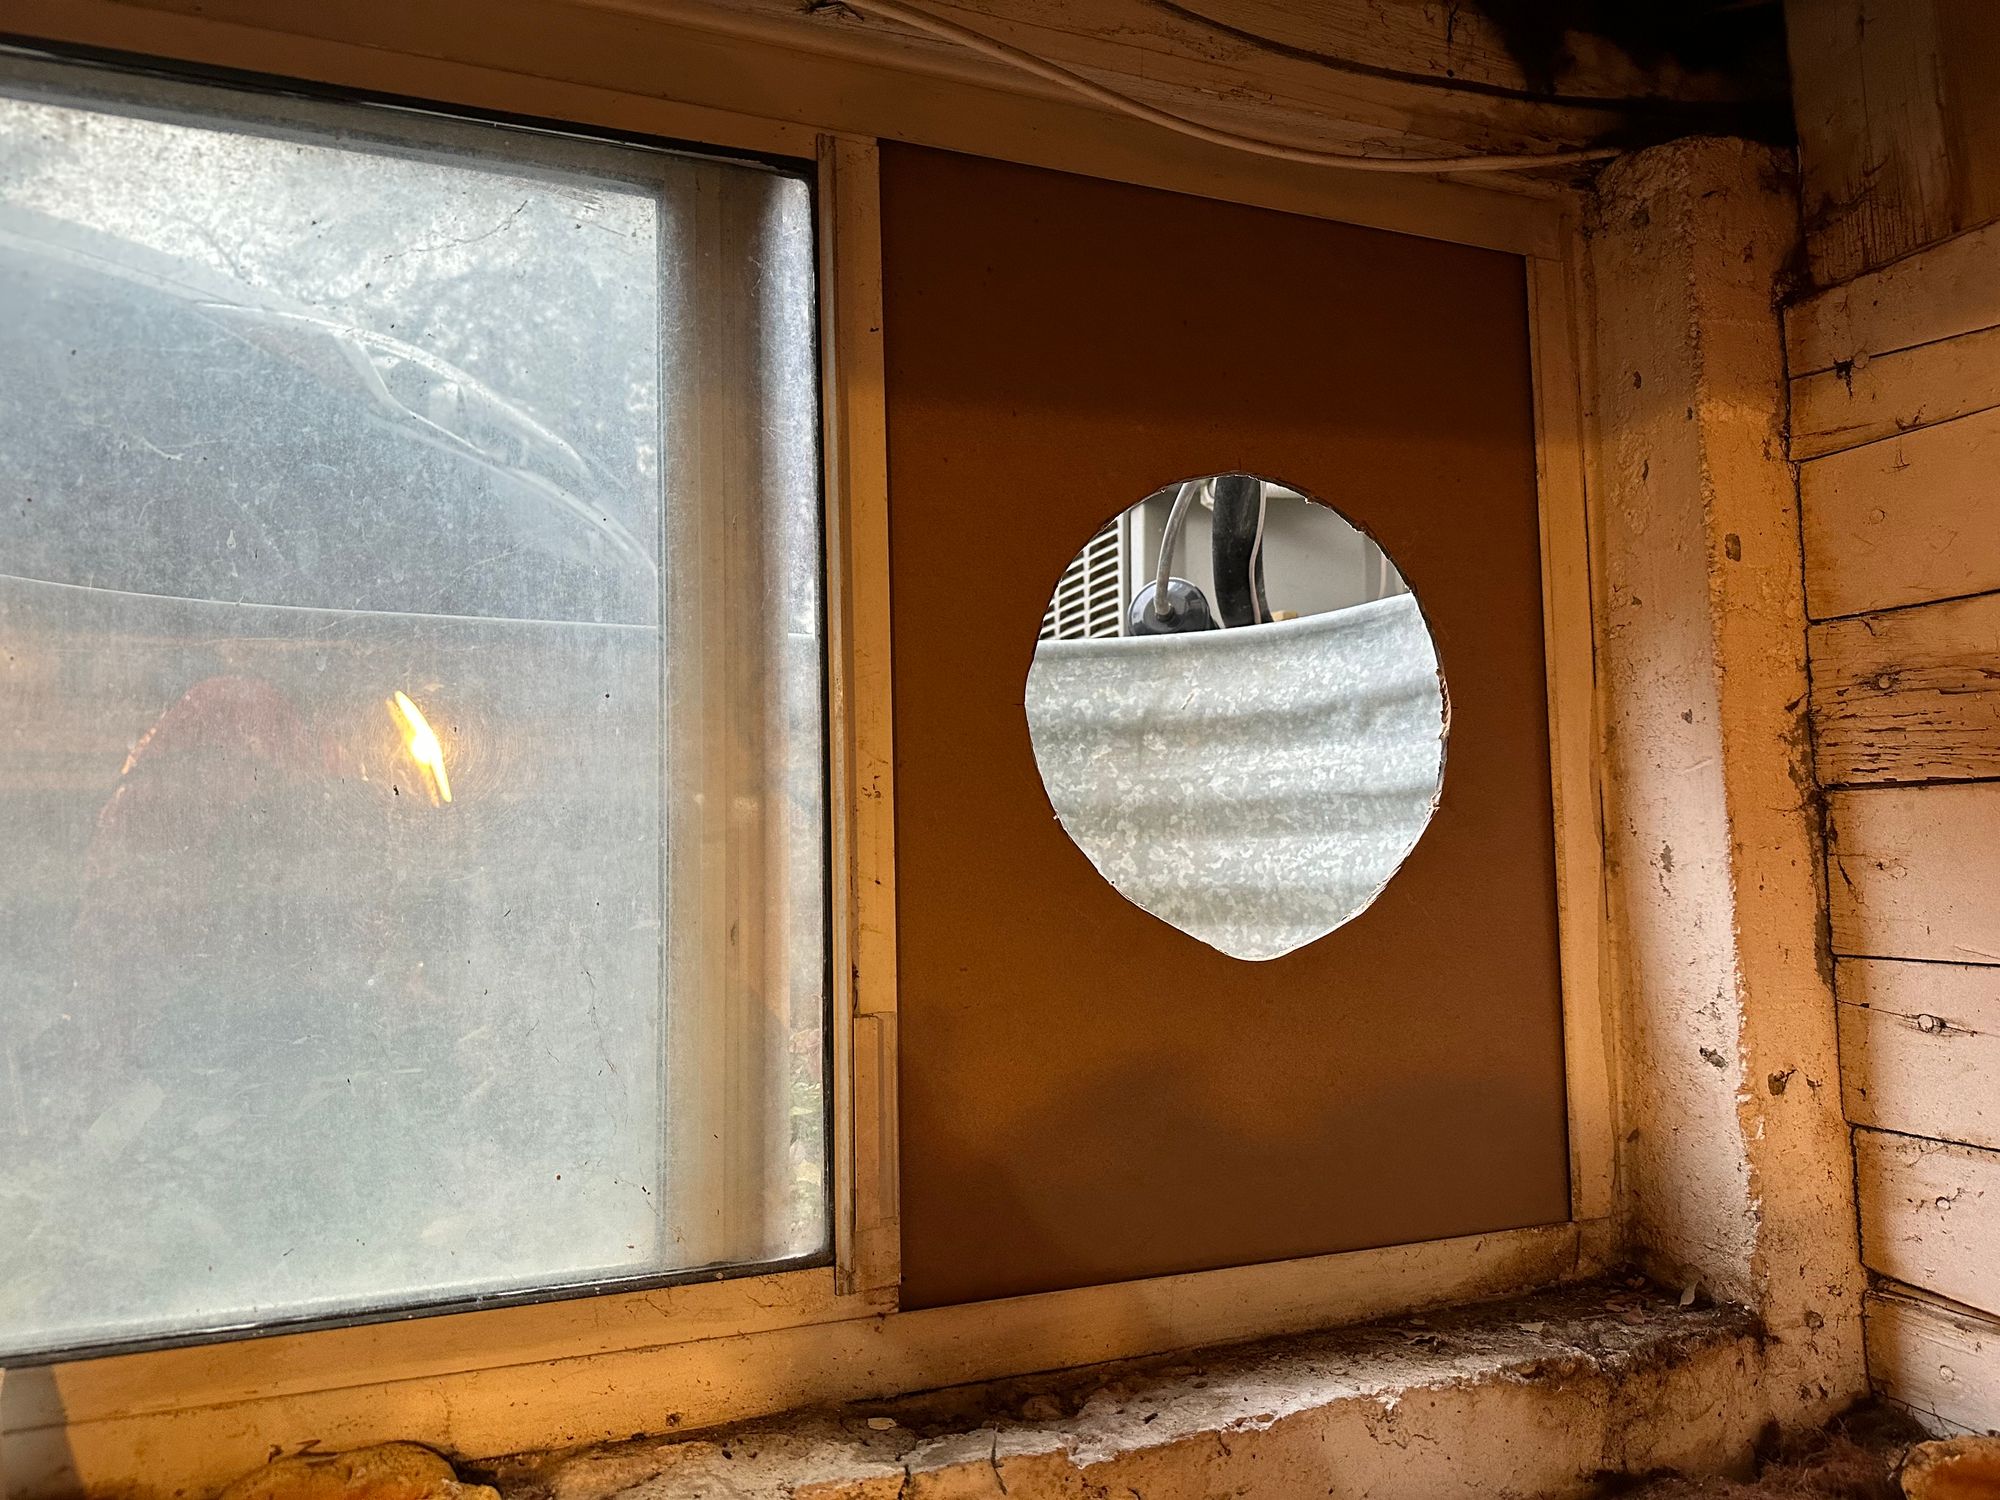 The window well in my basement workshop, with the window open and a piece of tileboard inserted. The tileboard has a rough circular hole cut into it for venting air from the paint booth.